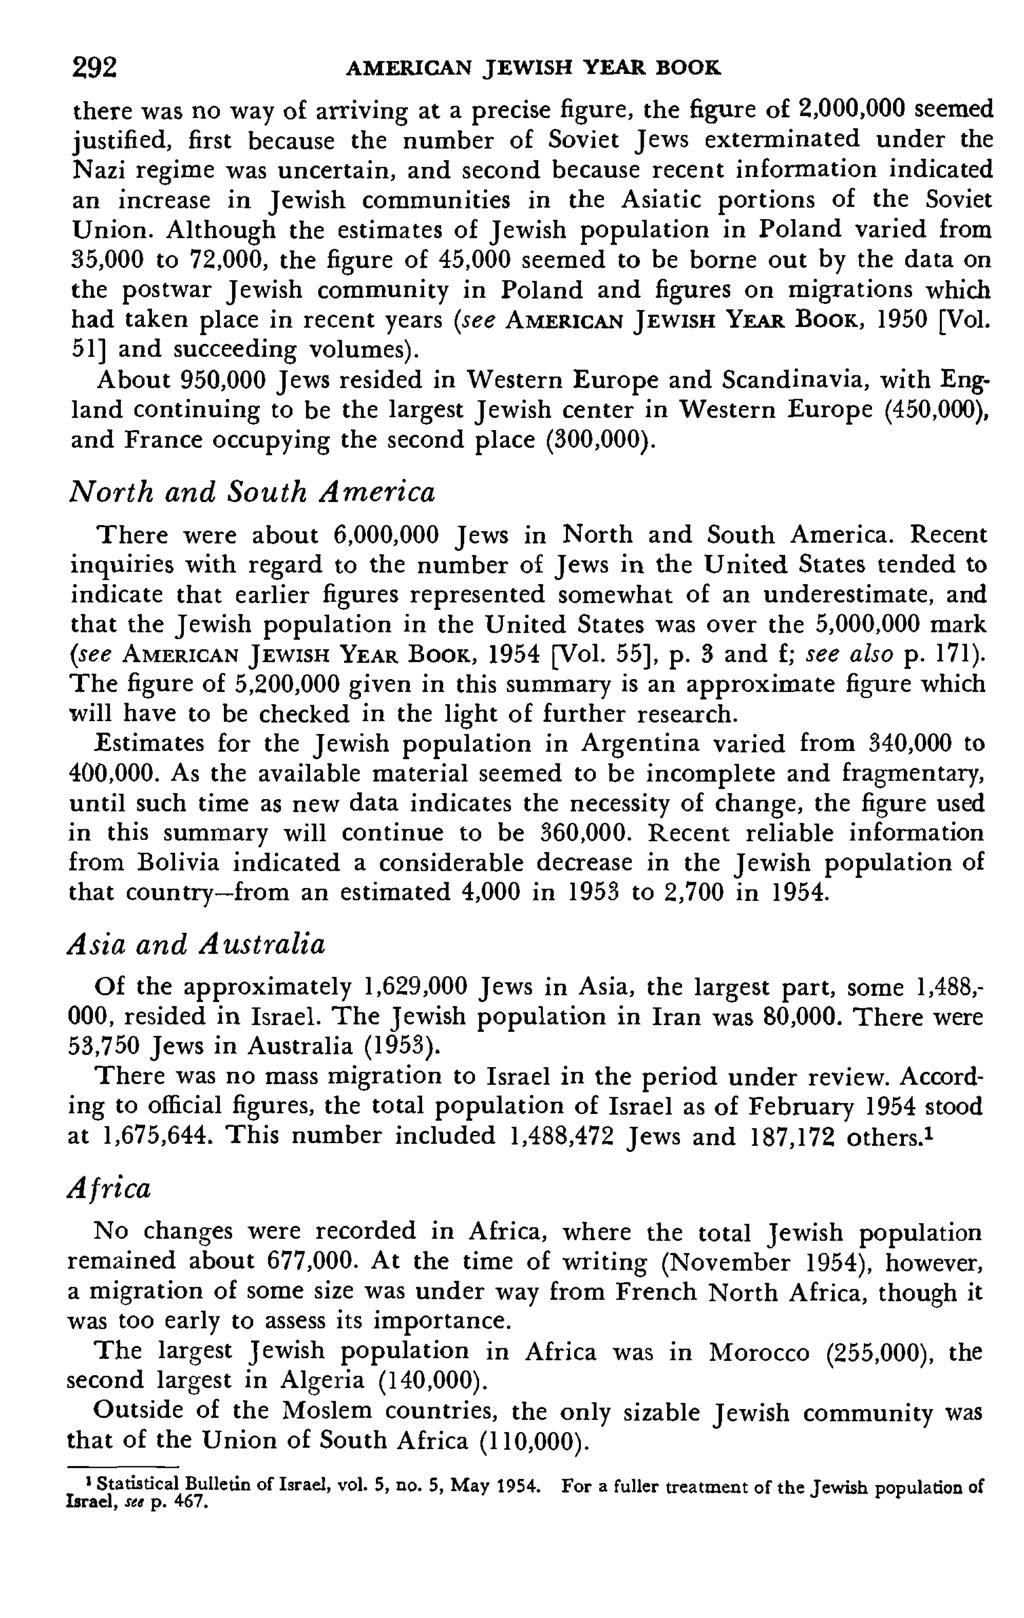 292 AMERICAN JEWISH YEAR BOOR there was no way of arriving at a precise figure, the figure of 2,000,000 seemed justified, first because the number of Soviet Jews exterminated under the Nazi regime